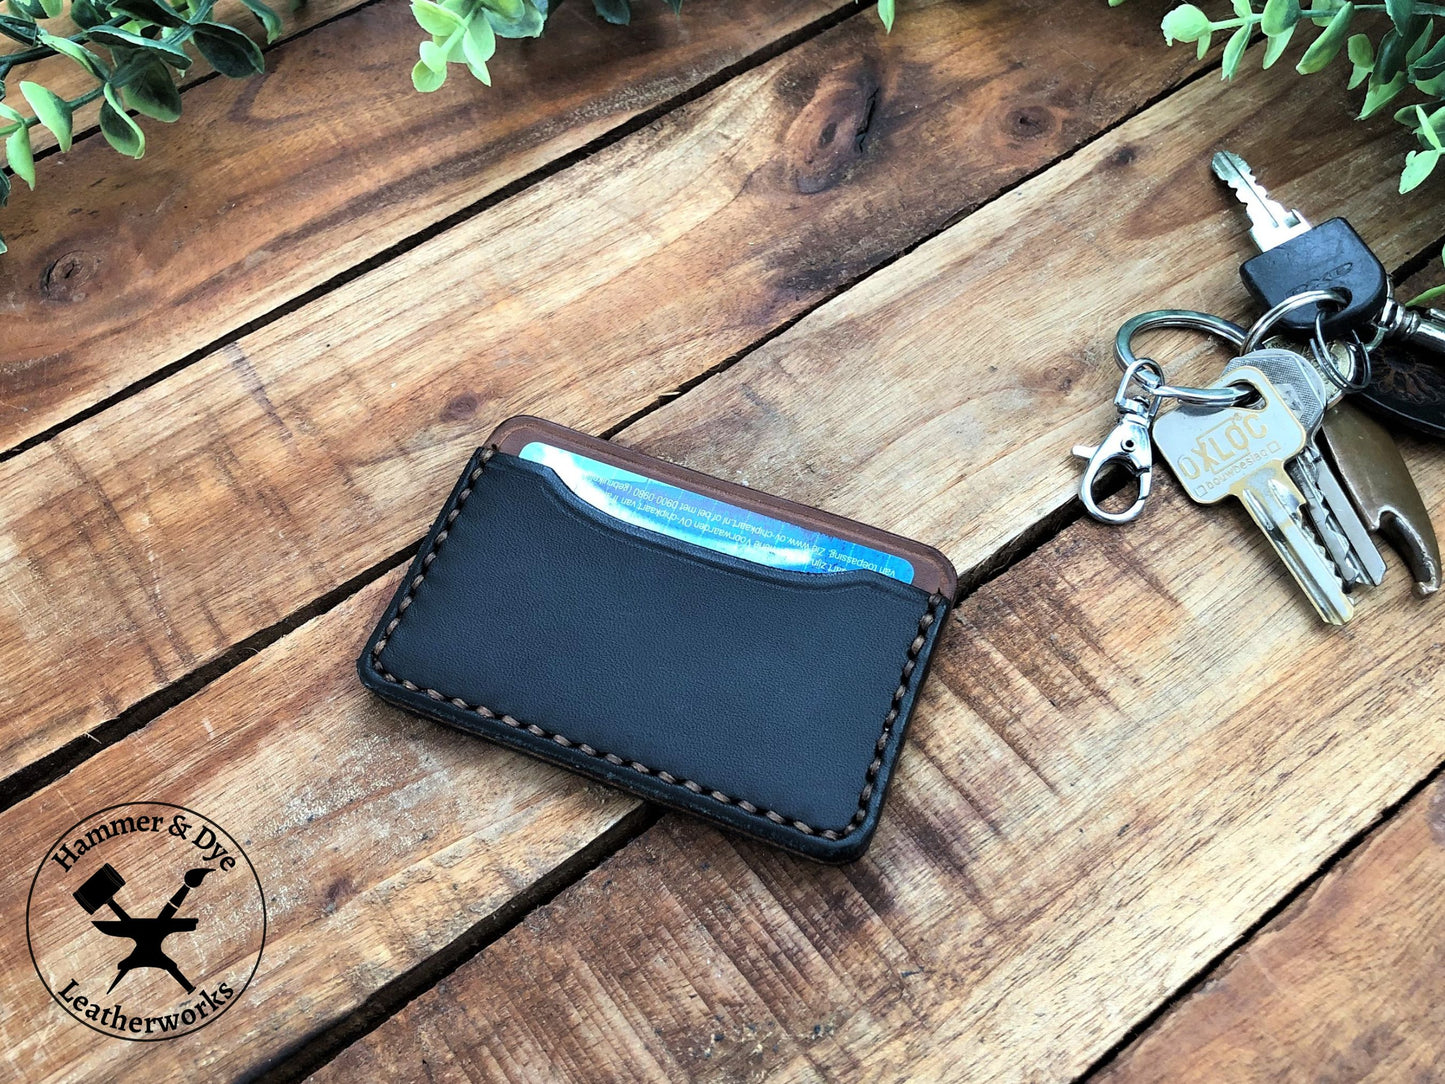 Minimalist Leather Card Wallet in Black and Brown on a desk next to some keys